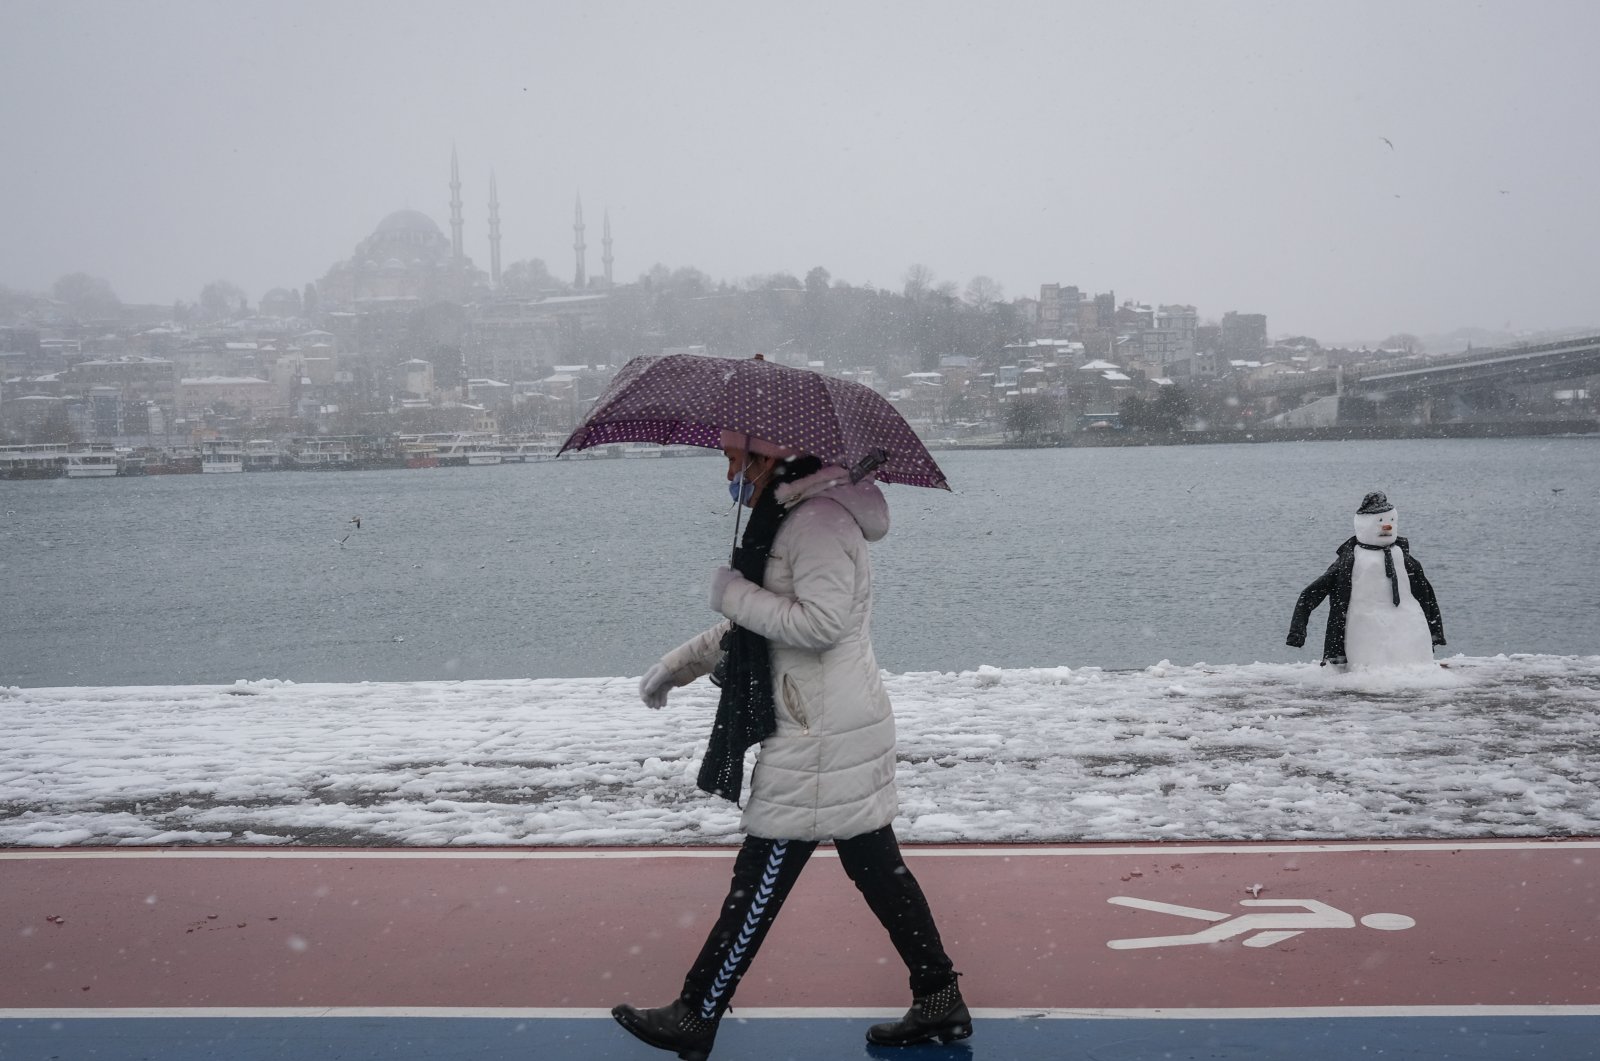 A woman passes by a snowman with Süleymaniye Mosque in the background on a snowy day during the lockdown in Istanbul, Turkey, on Feb. 14, 2021. (EPA Photo)